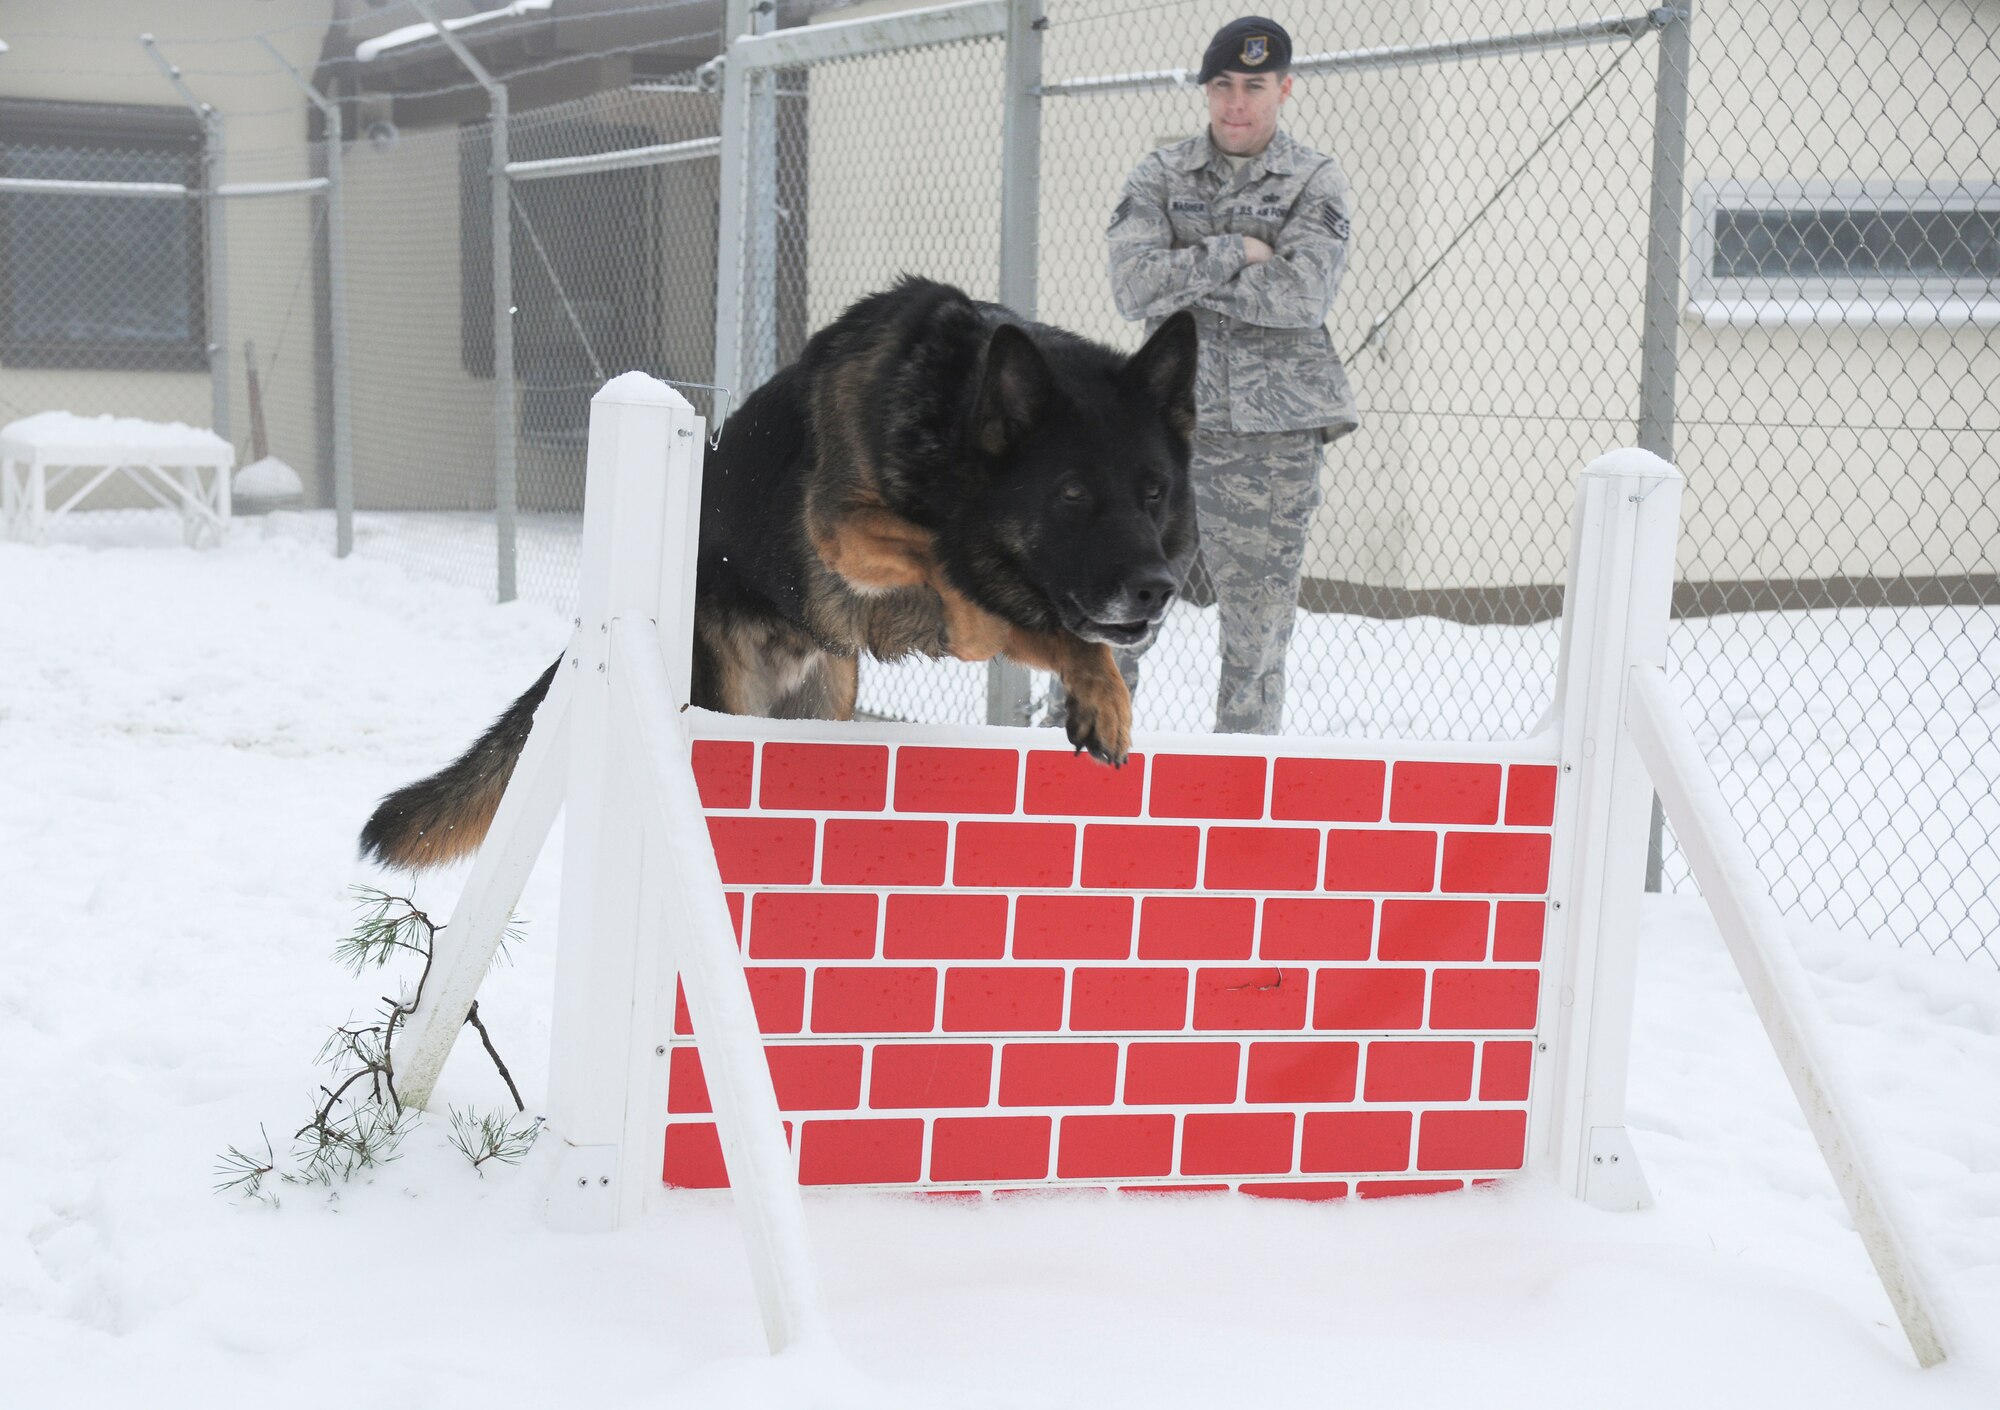 SPANGDAHLEM AIR BASE, Germany – Robson, a 5-year-old German Shepherd, jumps over an obstacle at the 52nd Security Forces Squadron military working dog facility Dec. 29. Military working dogs require extra care during the winter months because of the harsh weather and salt on the roads that irritates the dog’s underbelly and paws. The dogs are also given time daily to play in the snow to help acclimate themselves to the temperature and the snow. (U.S. Air Force photo/Senior Airman Nathanael Callon)